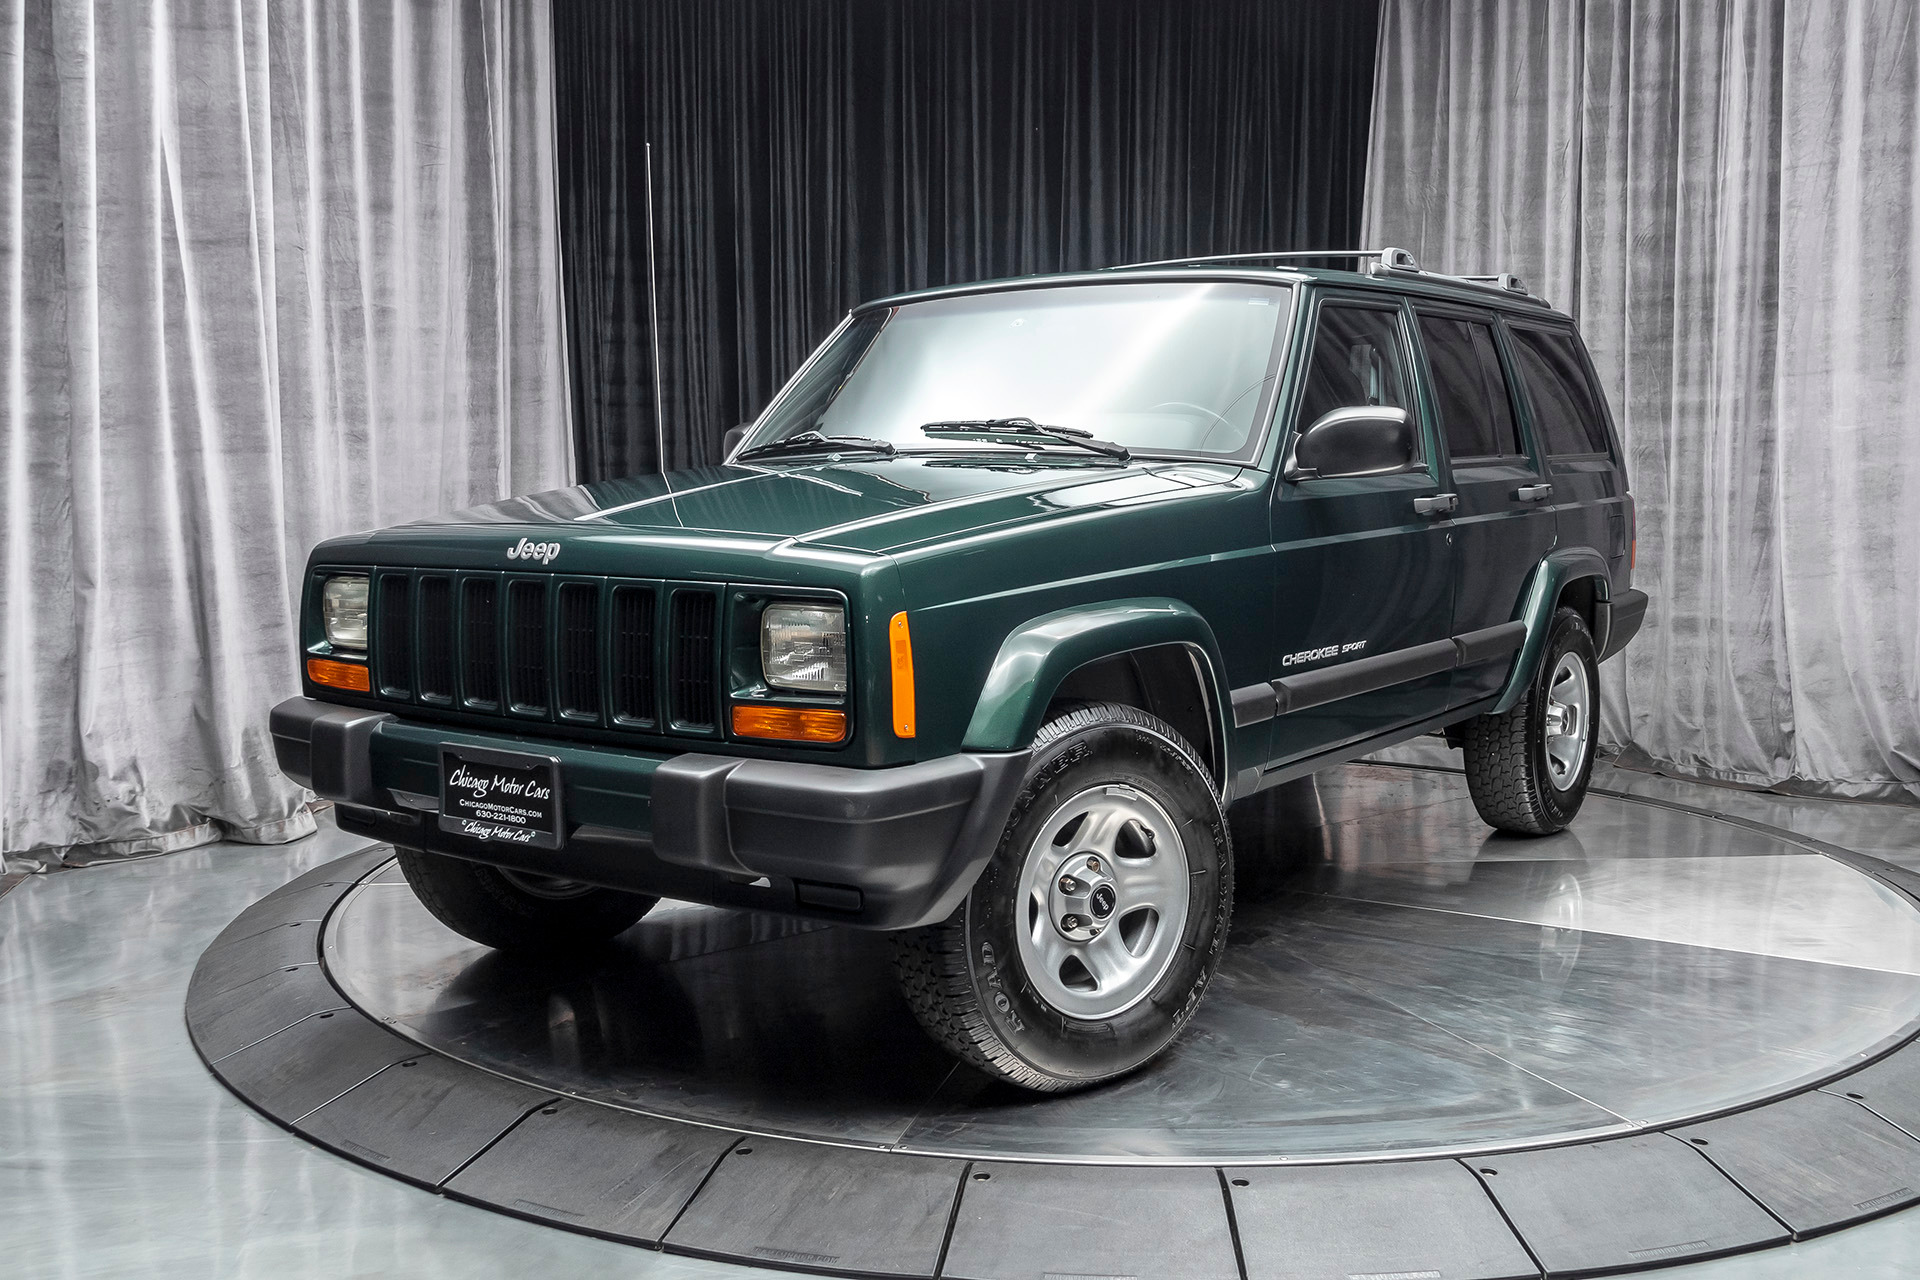 zeven Verzadigen Clam Used 2000 Jeep Cherokee Sport 4x4 One Owner 48k Original Miles For Sale  (Special Pricing) | Chicago Motor Cars Stock #17527